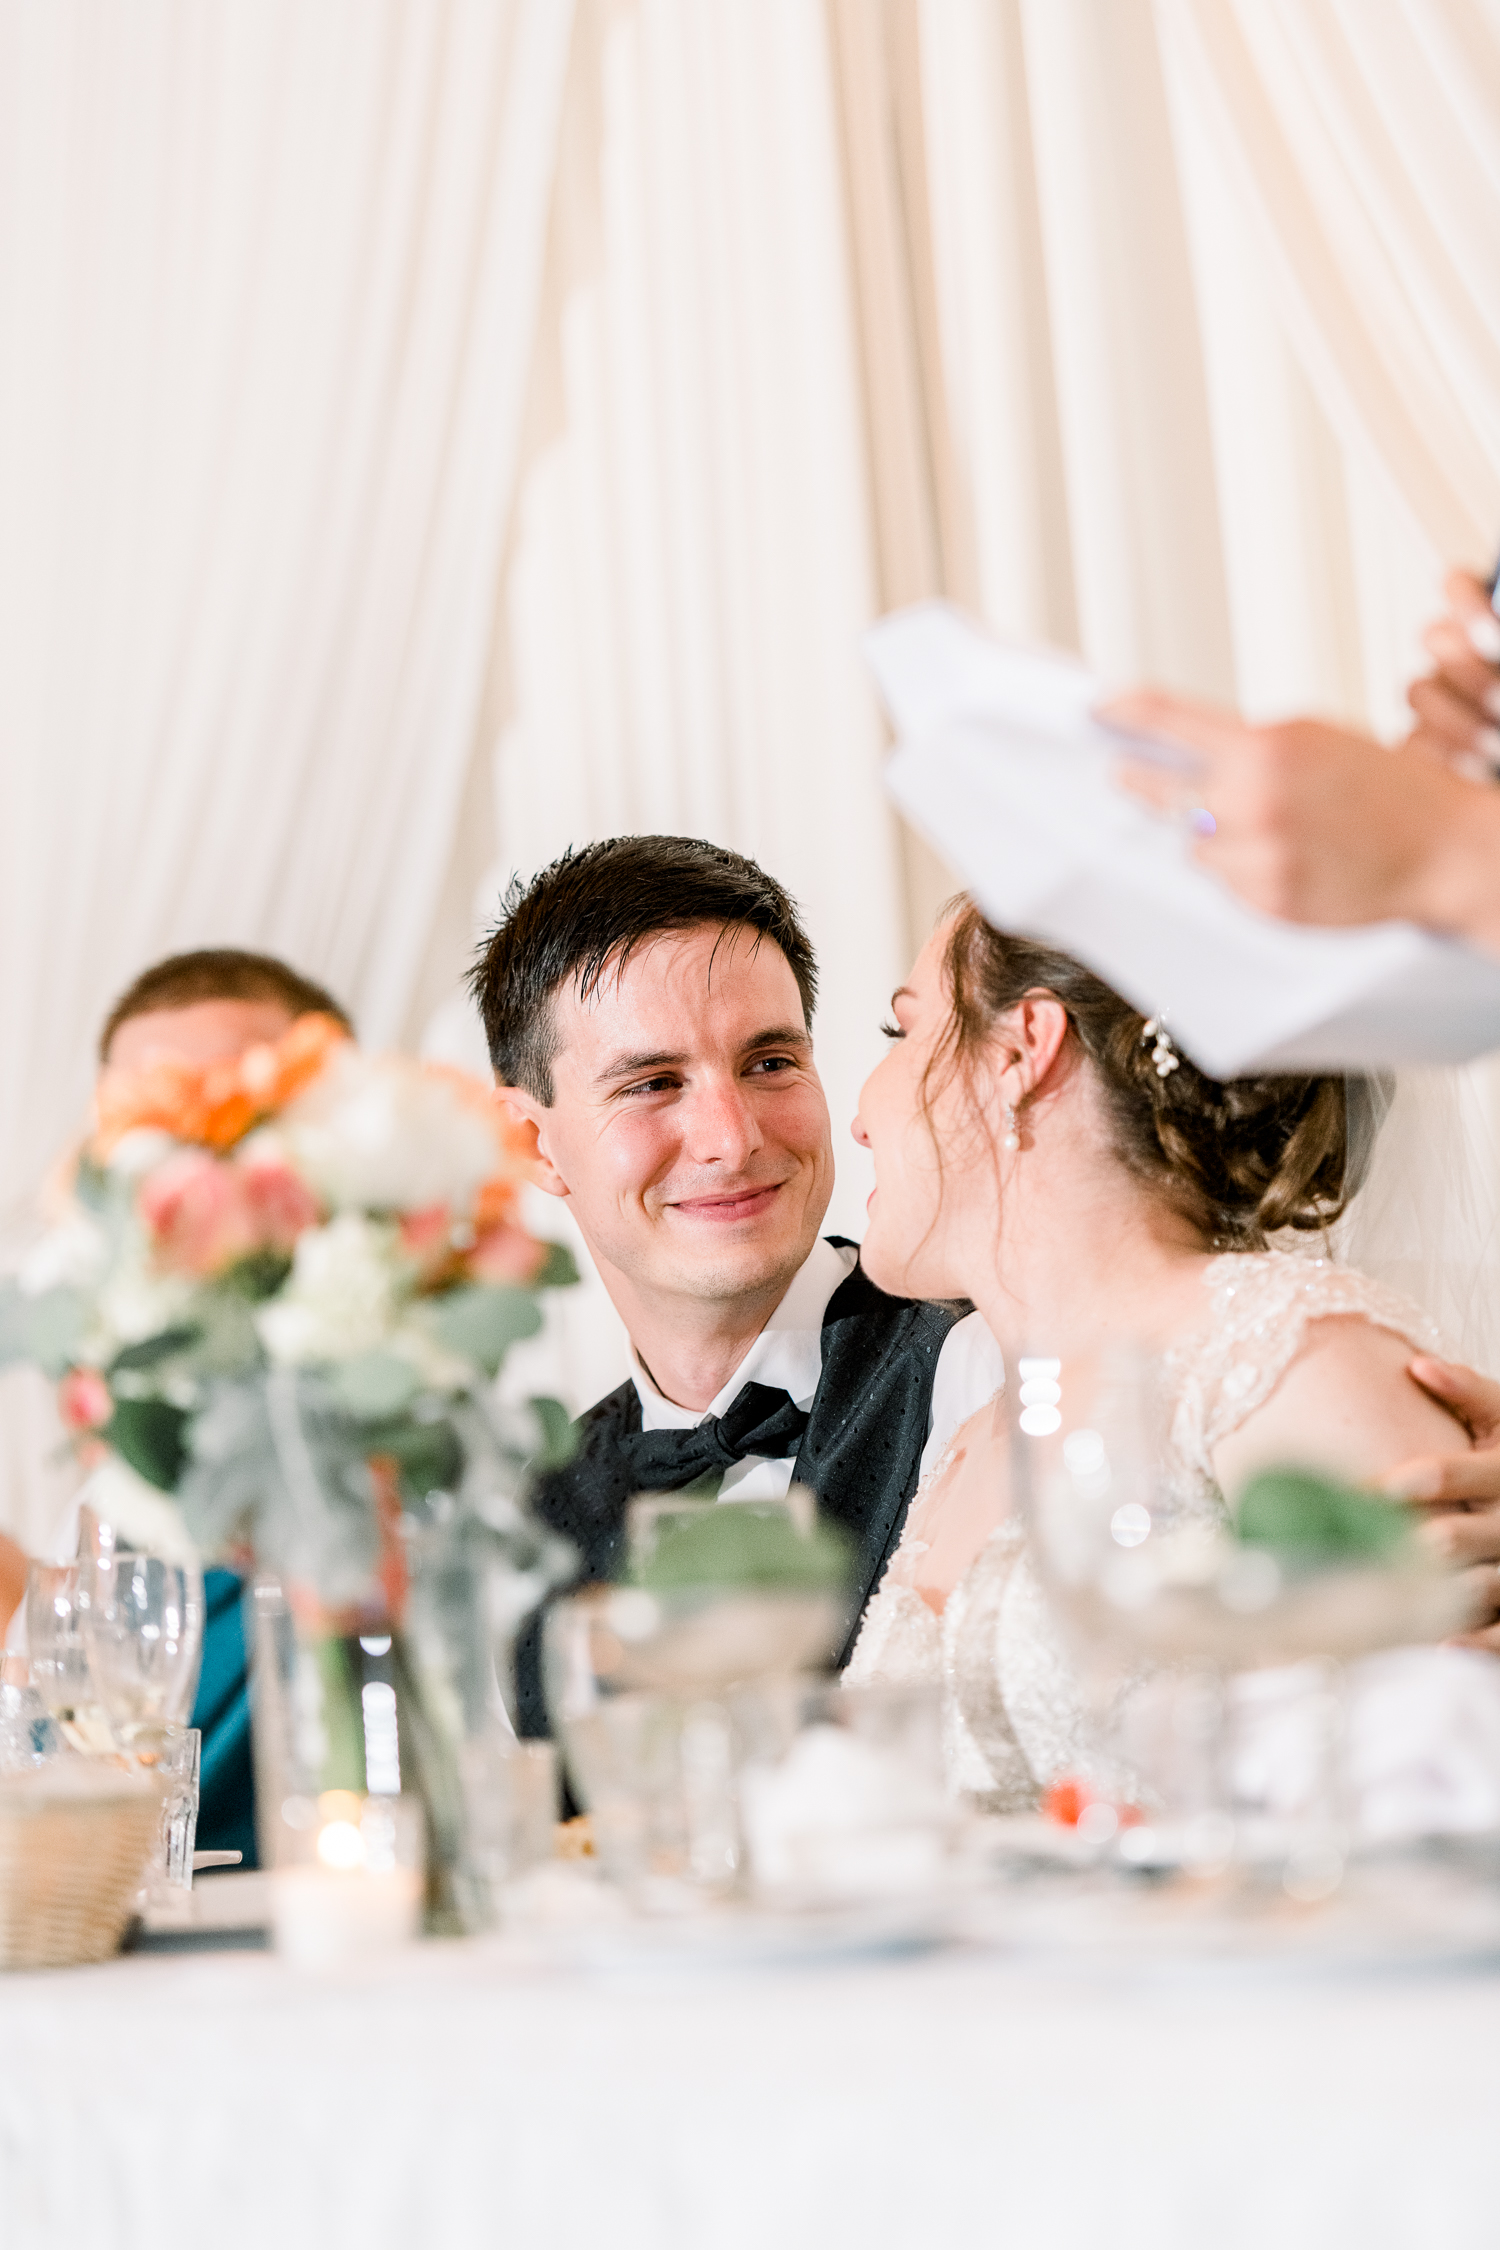 Groom looks at bride with a smile